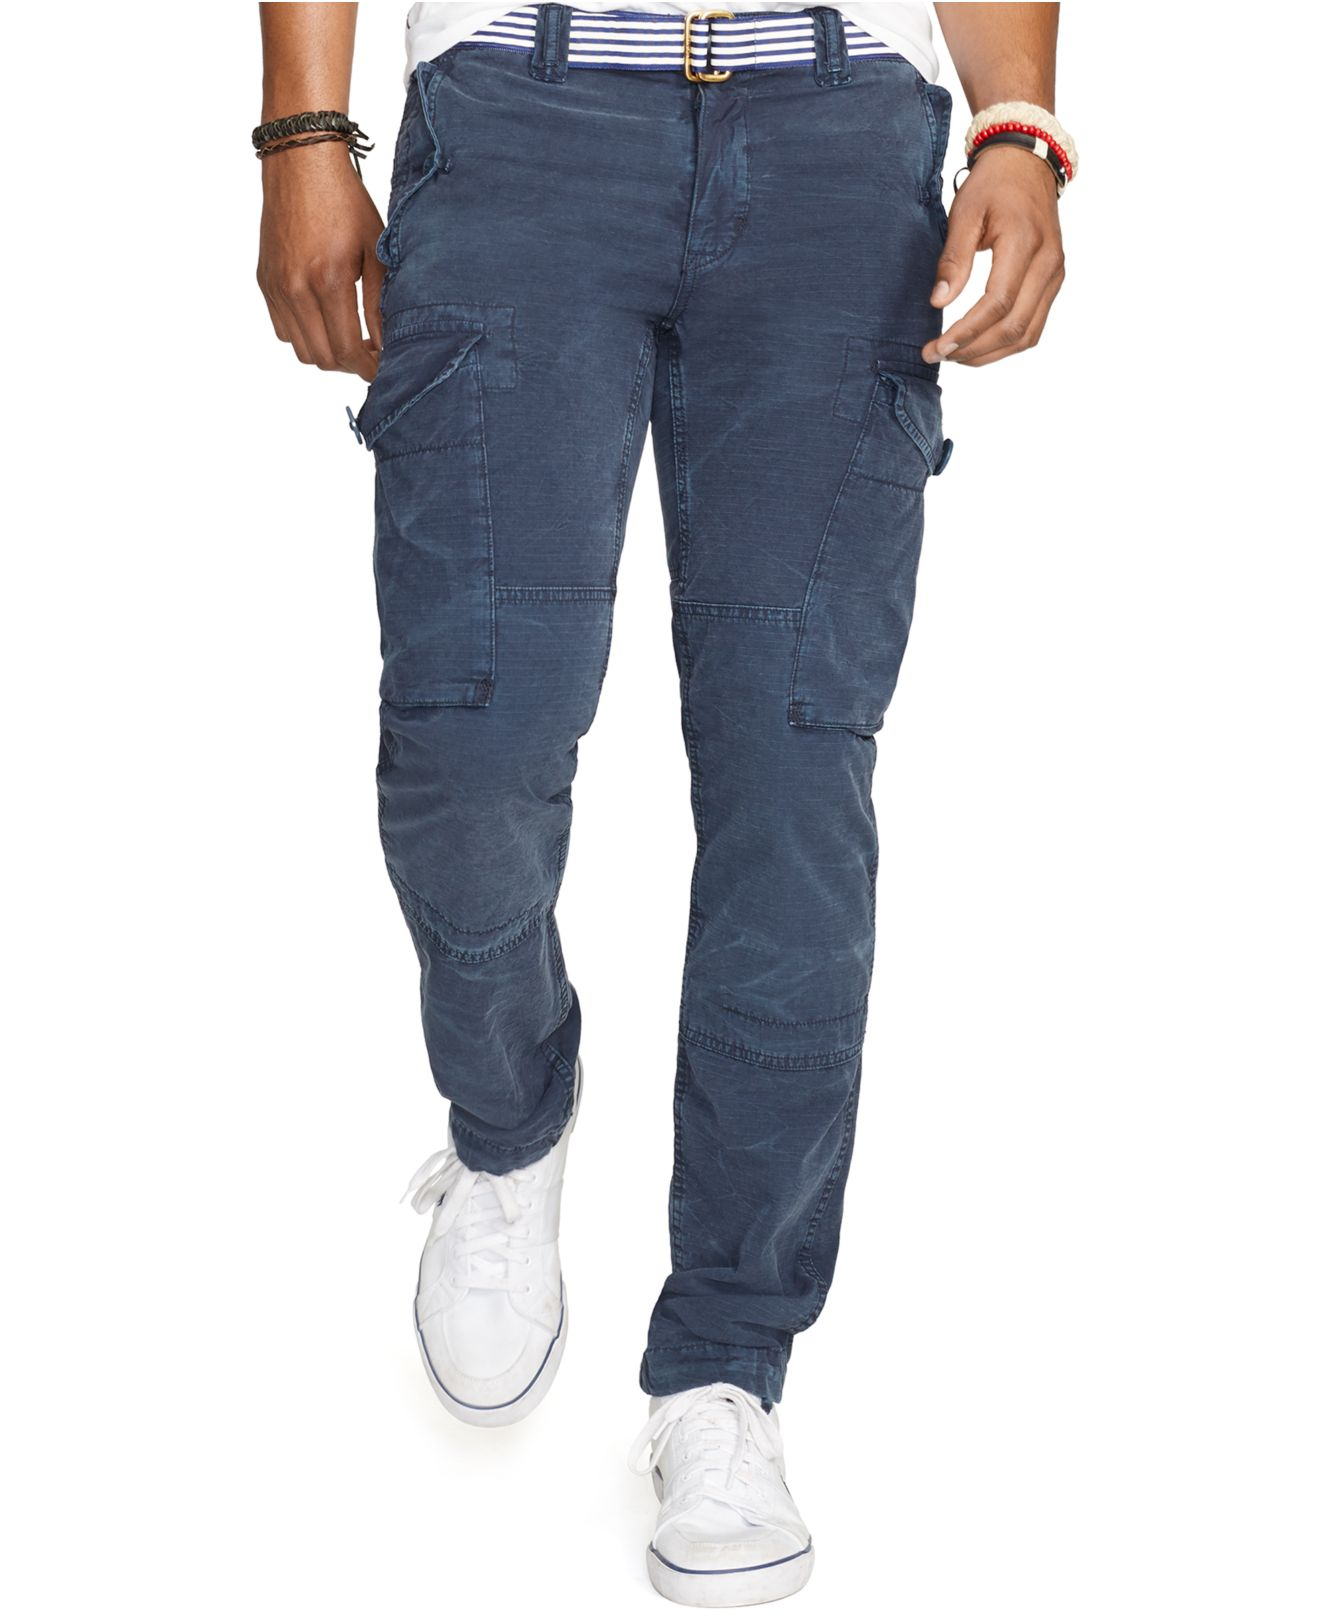 Lyst - Polo Ralph Lauren Straight-fit Ripstop Cargo Pants in Blue for Men